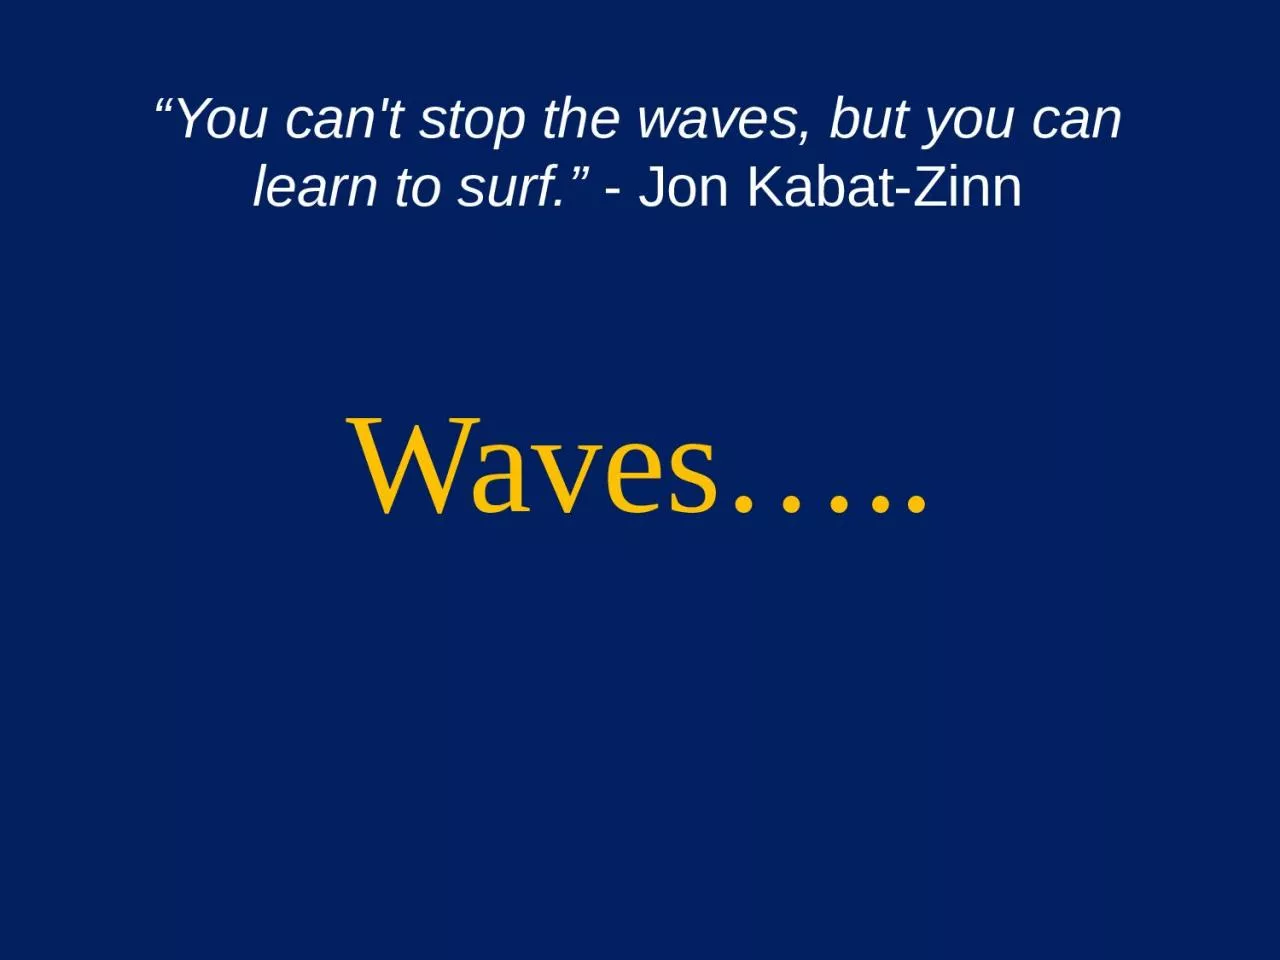 Waves….. “You can't stop the waves, but you can learn to surf.”